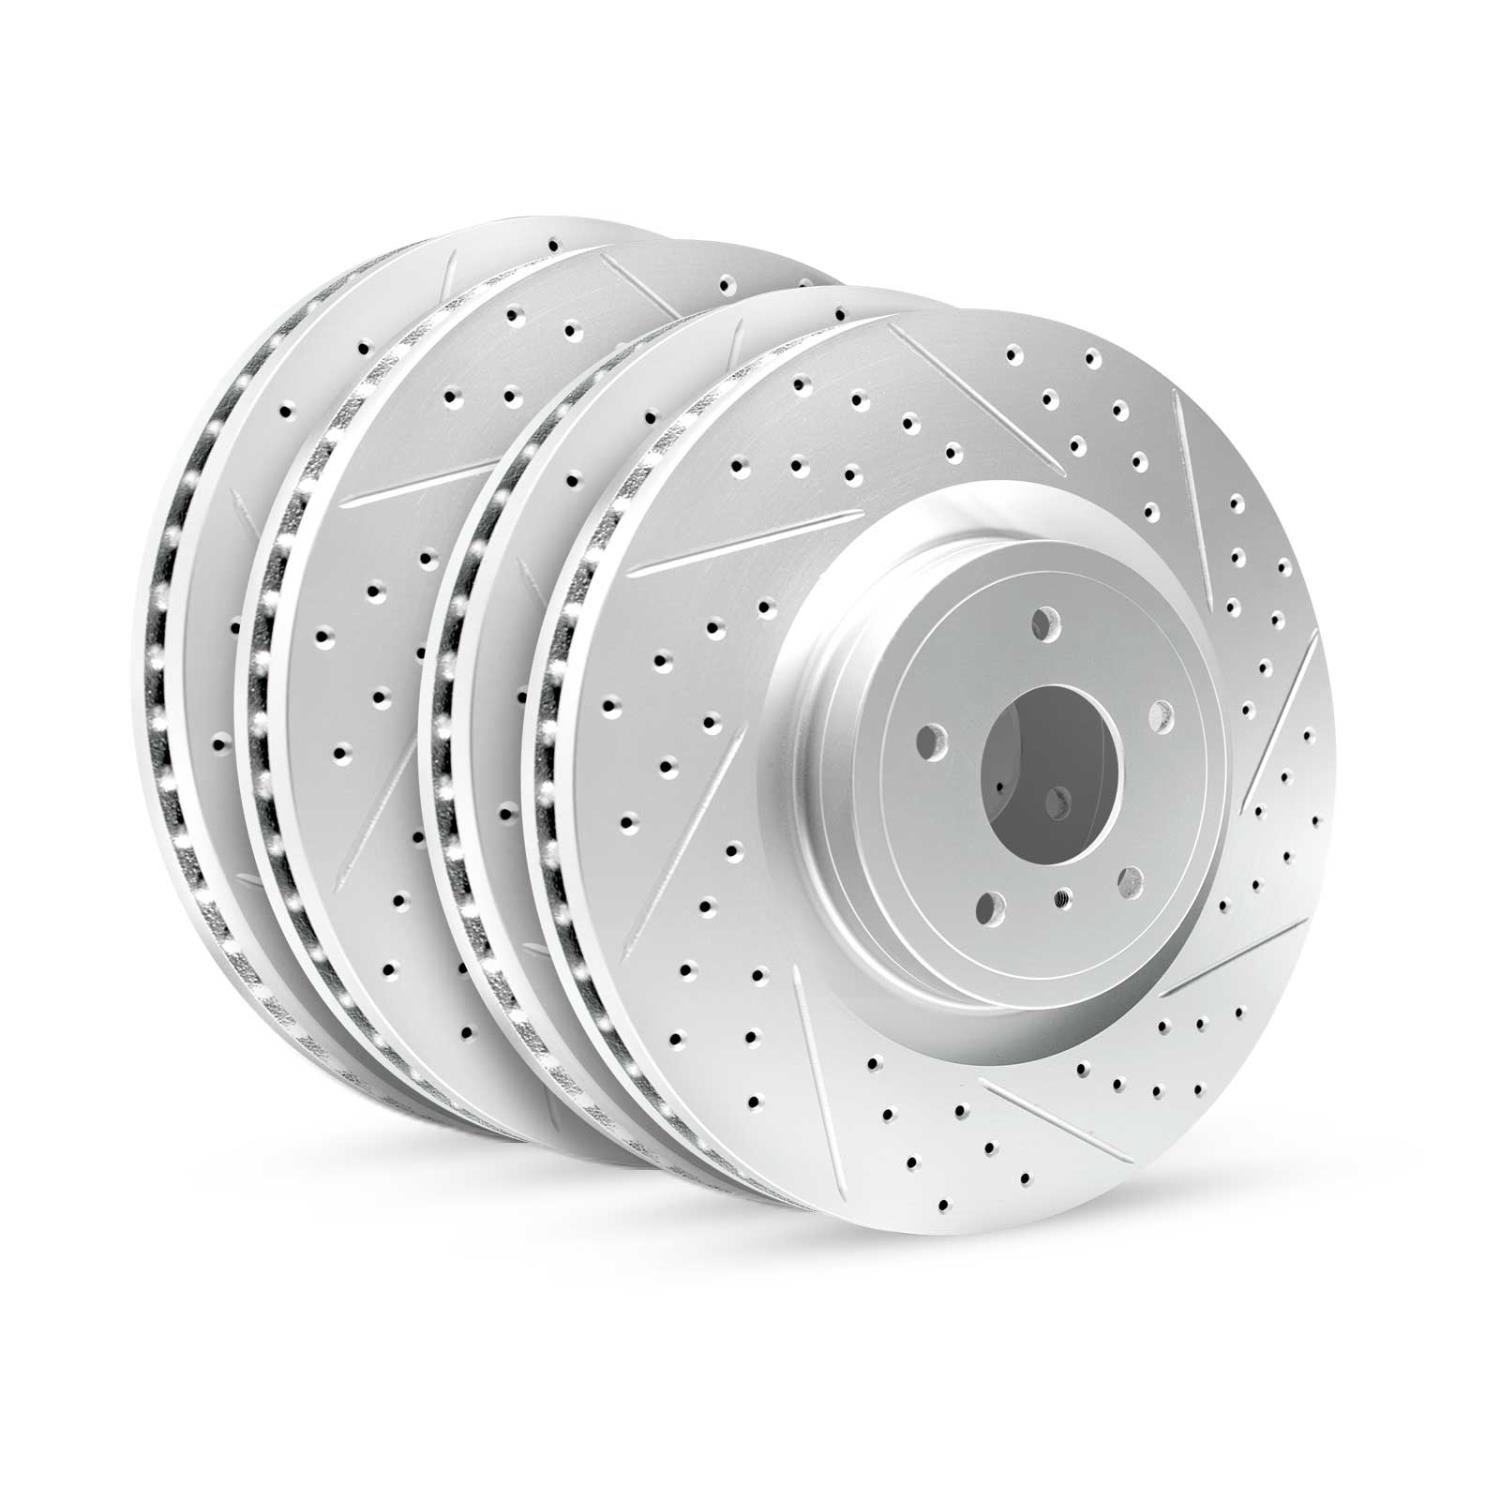 GEO-Carbon Drilled/Slotted Rotors, 1995-2000 Lexus/Toyota/Scion, Position: Front/Rear